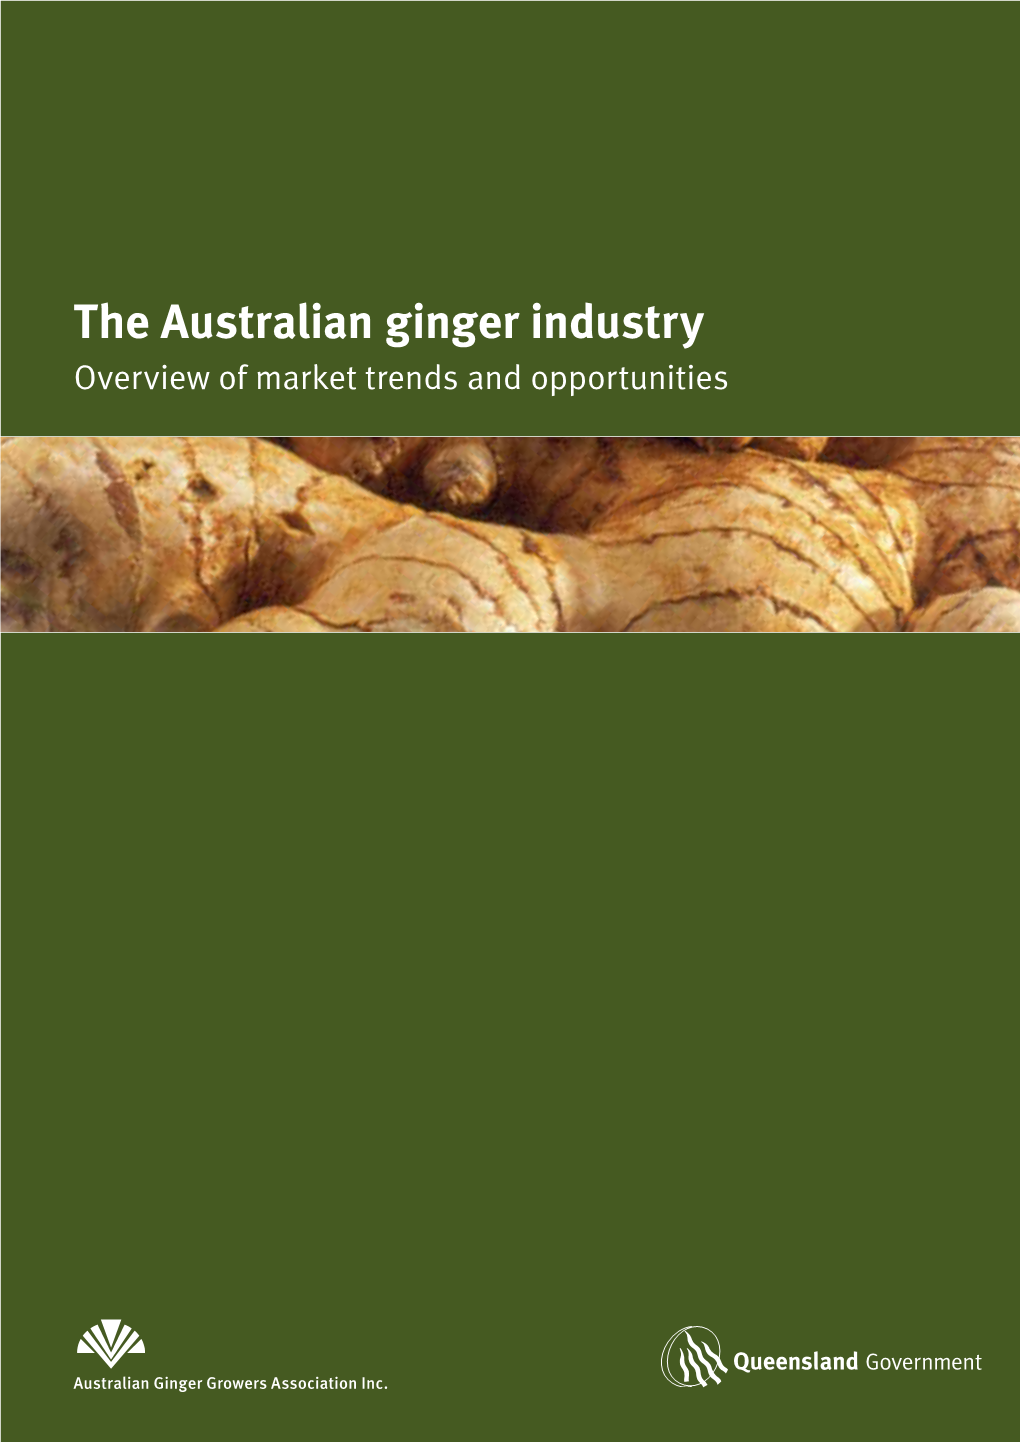 The Australian Ginger Industry Overview of Market Trends and Opportunities